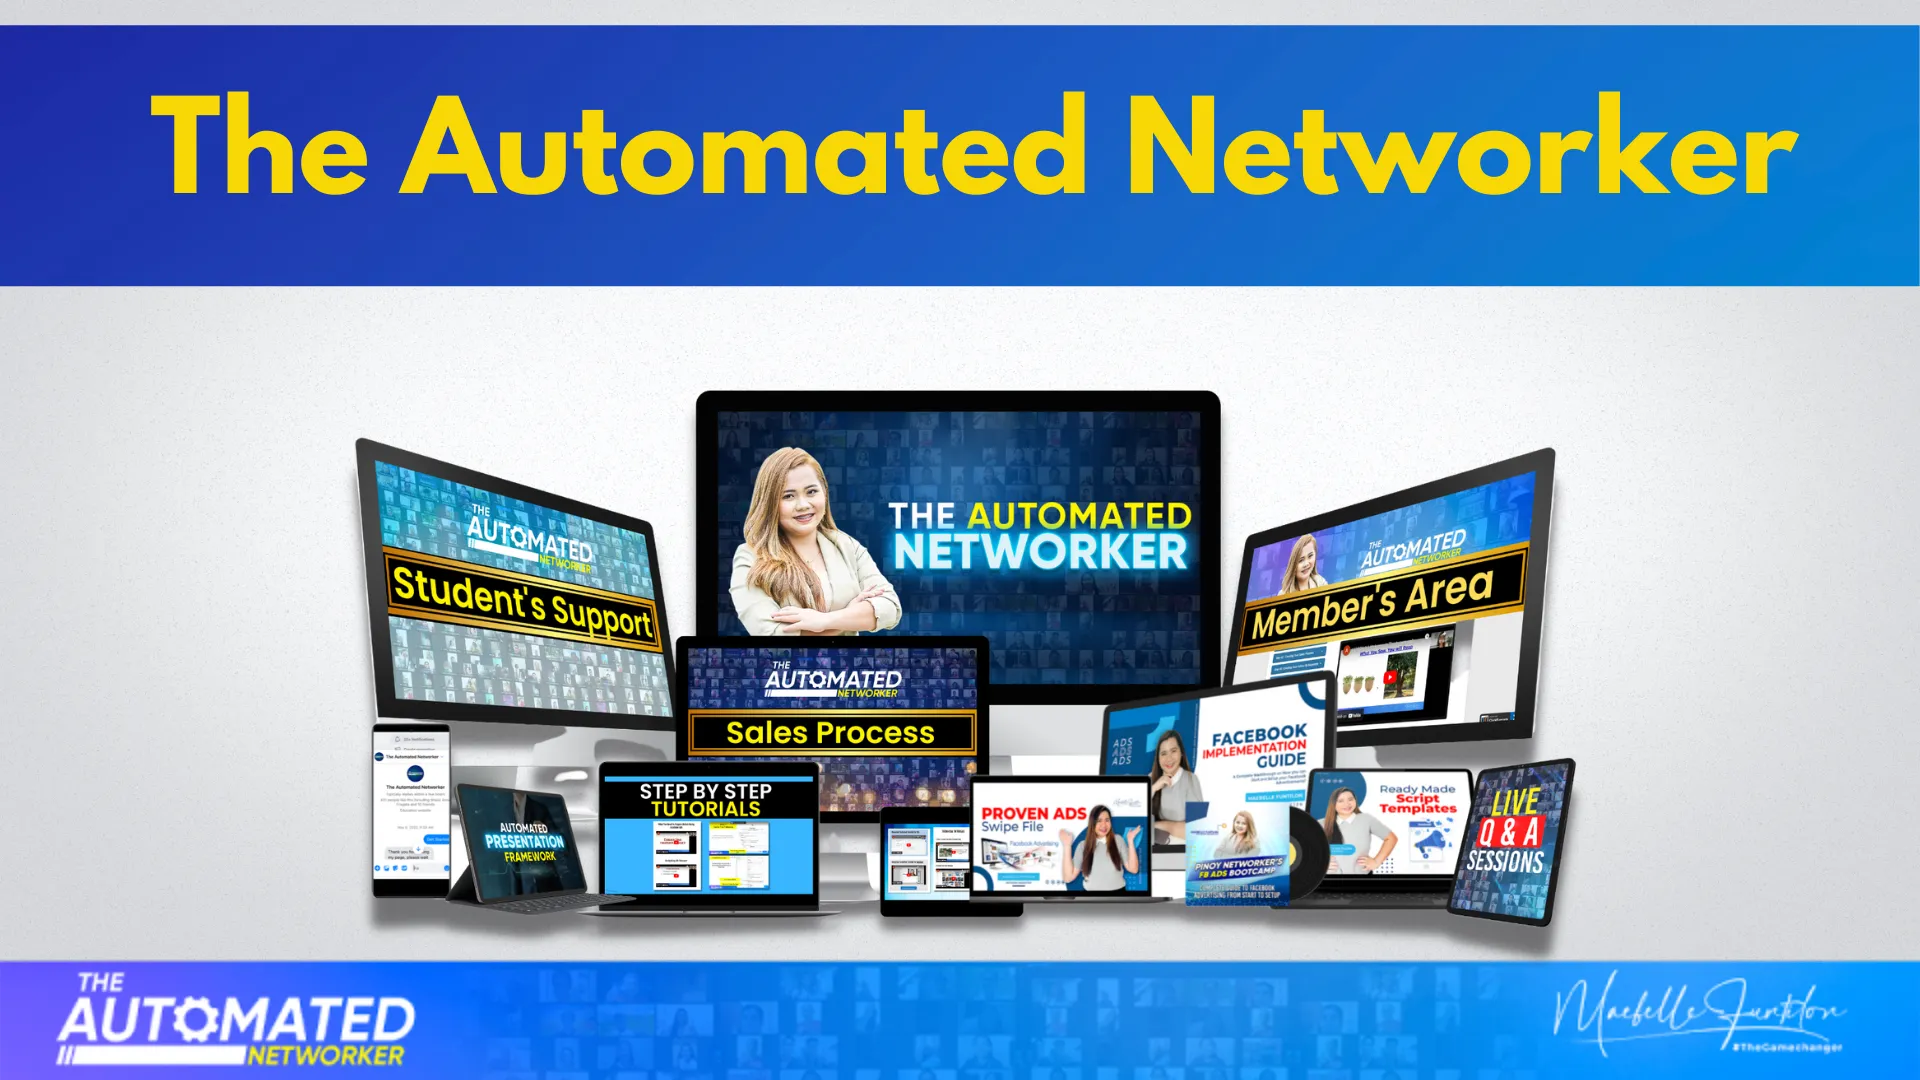 The Automated Networker Program